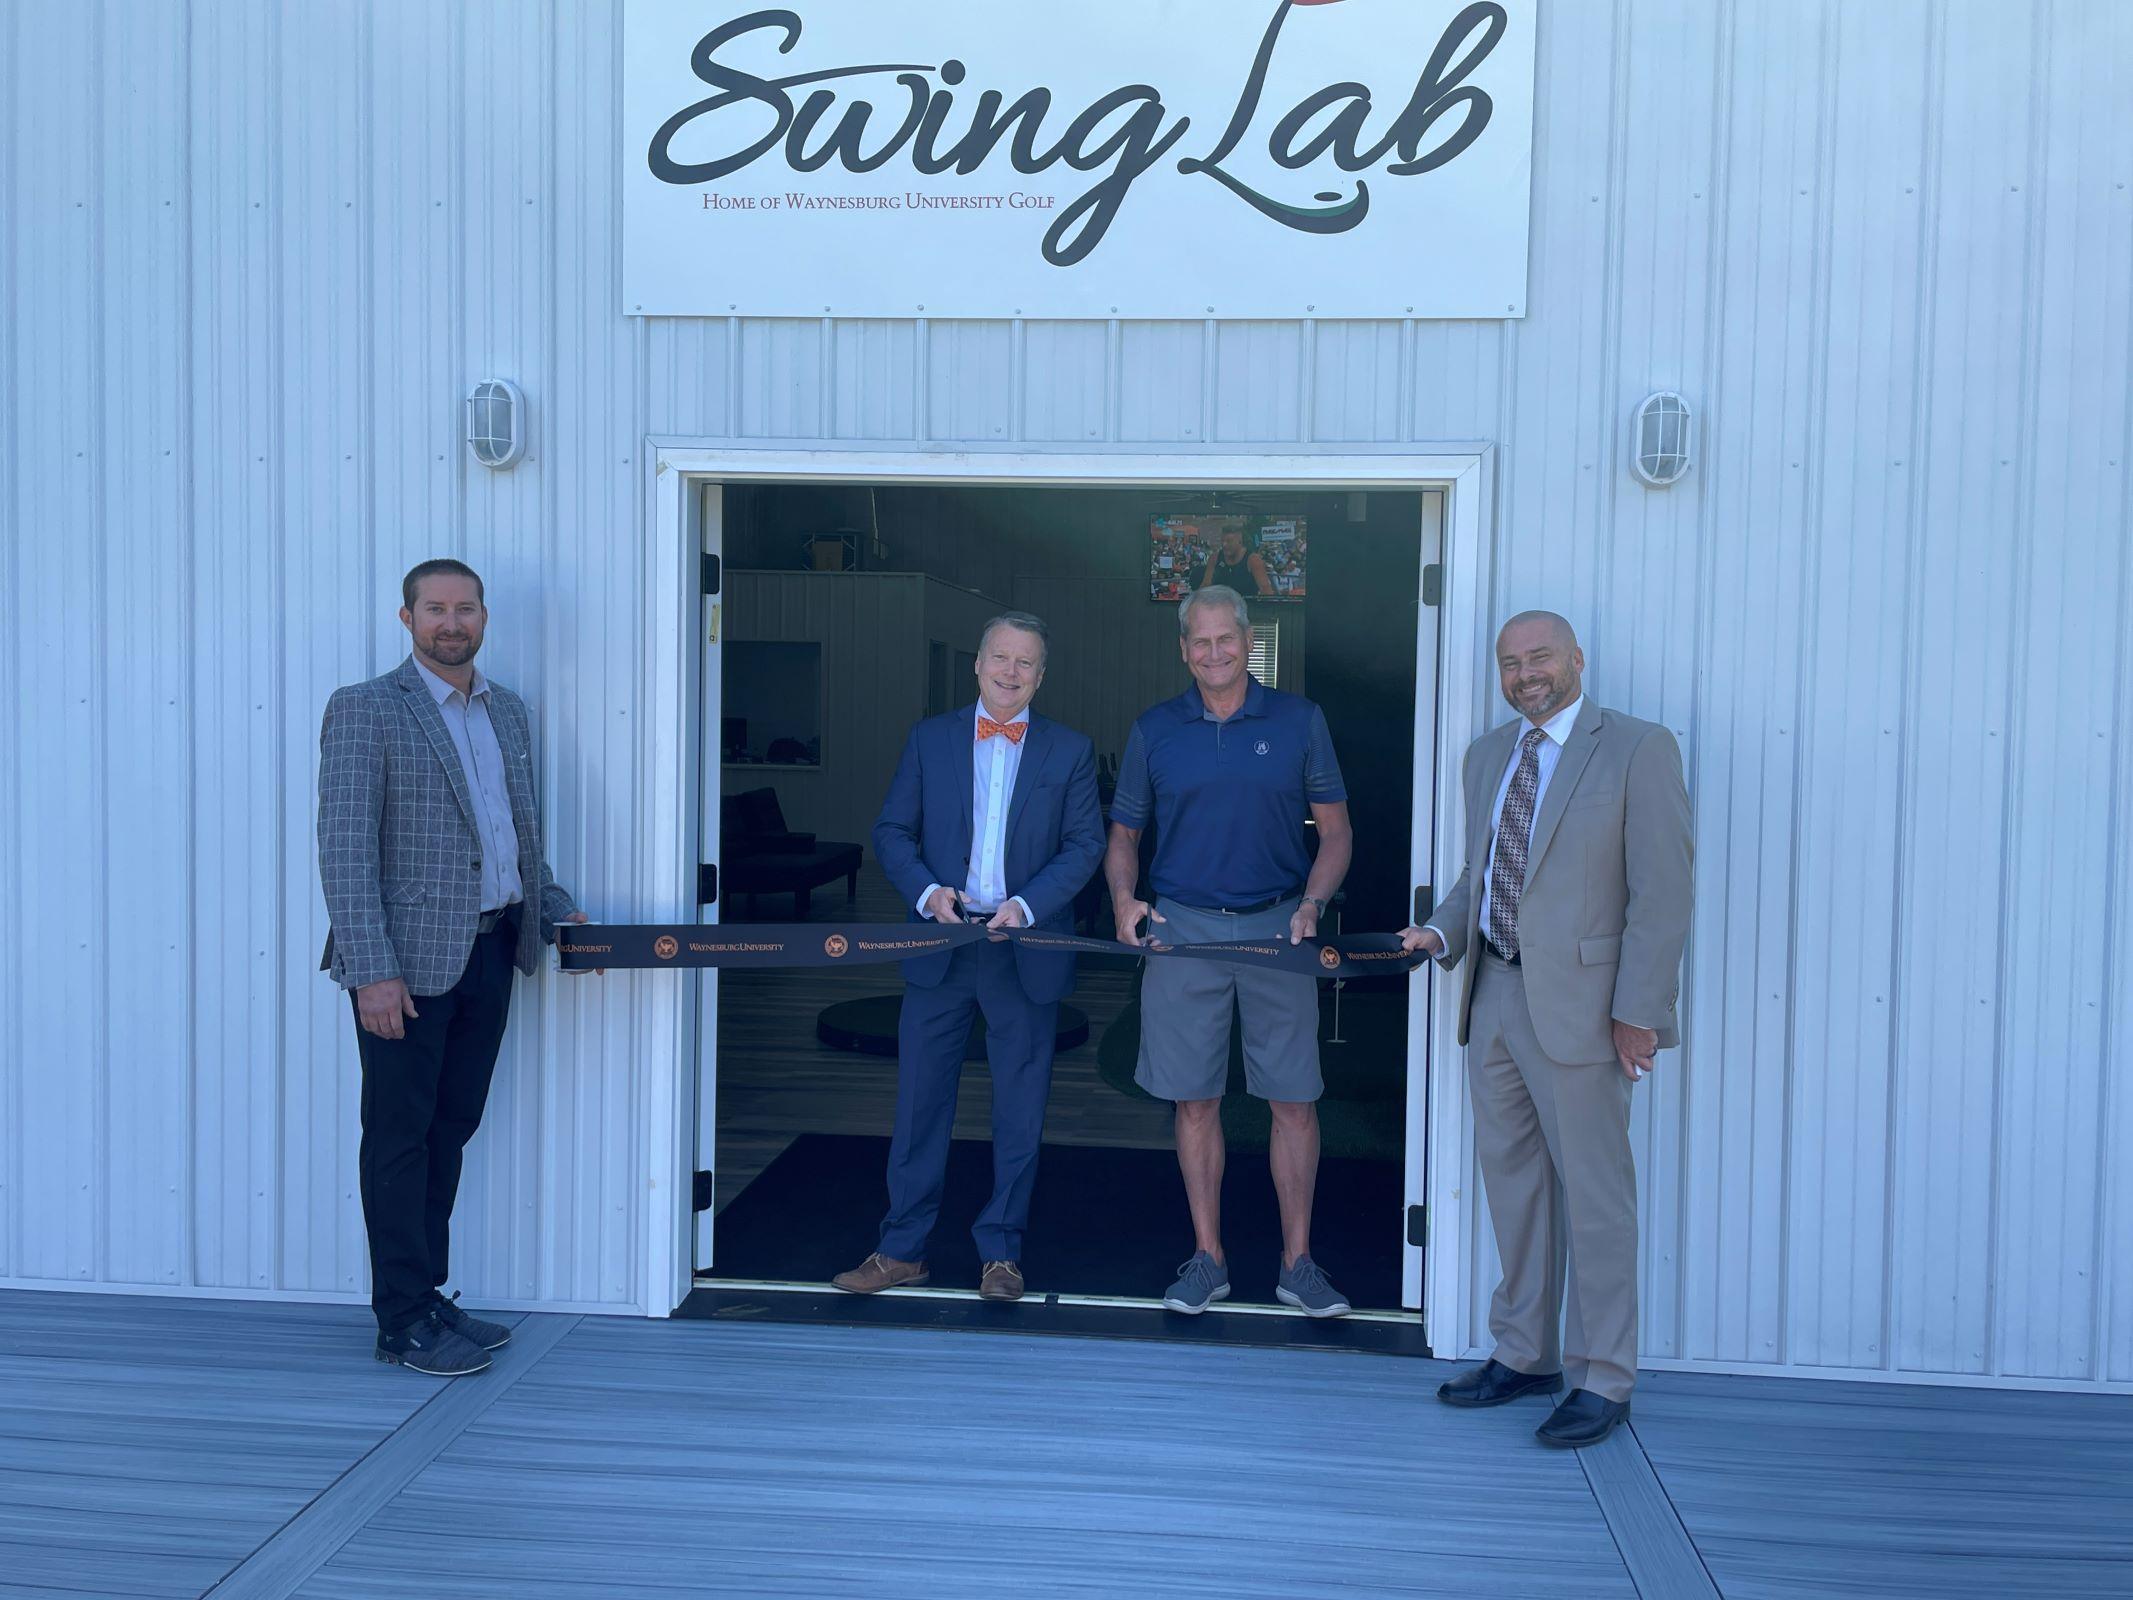 Ribbon Cutting at the "Swing Lab"